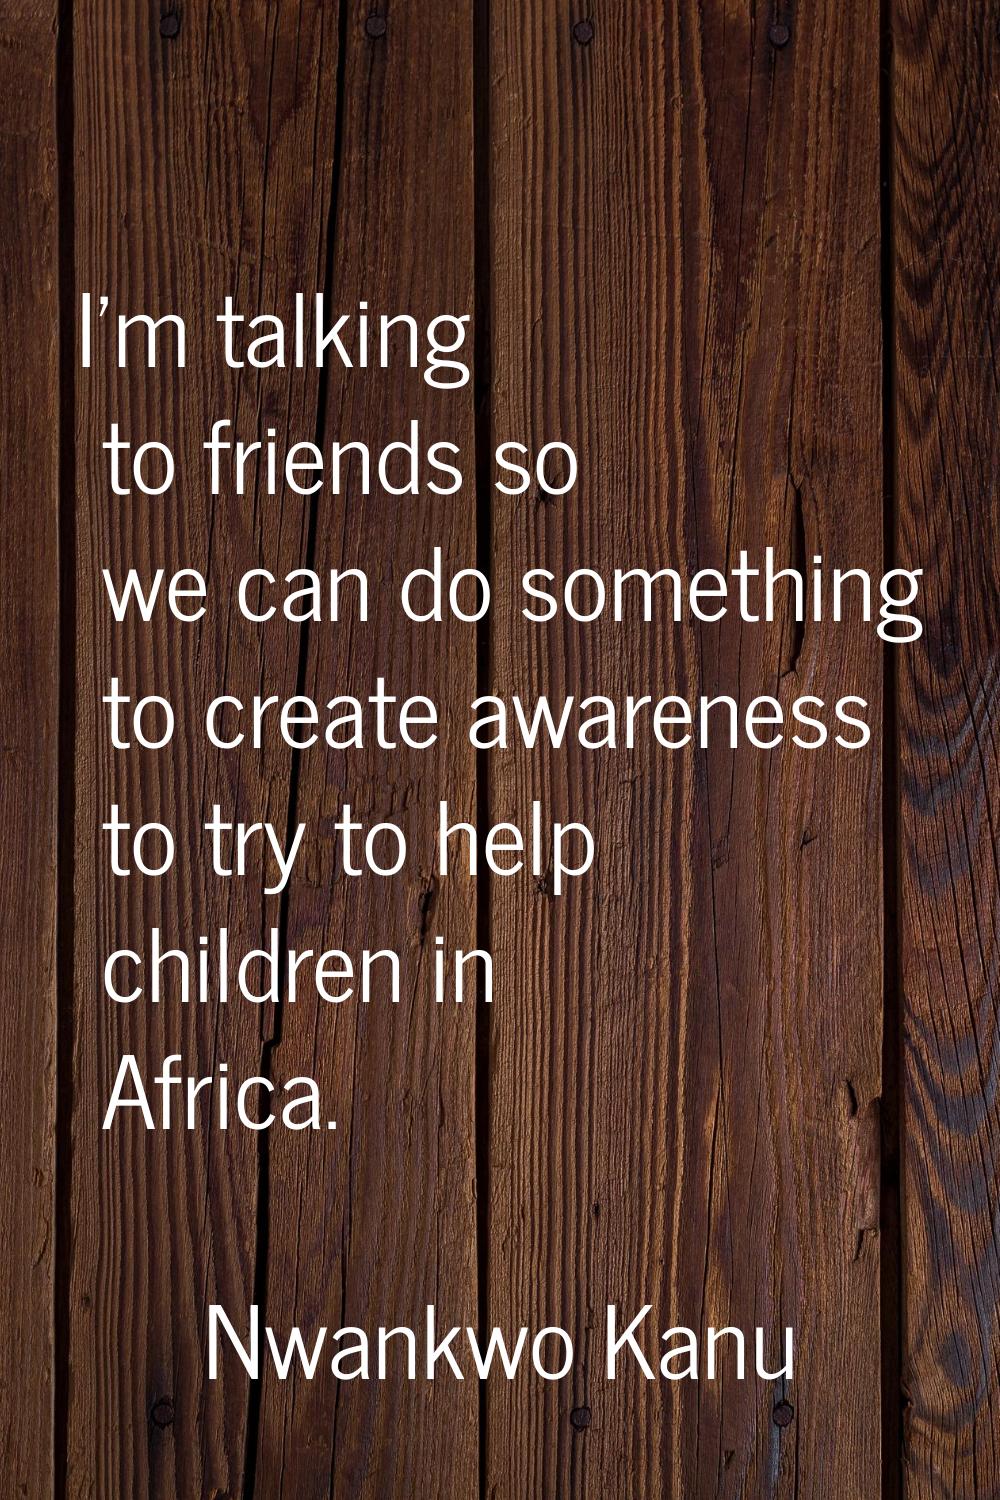 I'm talking to friends so we can do something to create awareness to try to help children in Africa